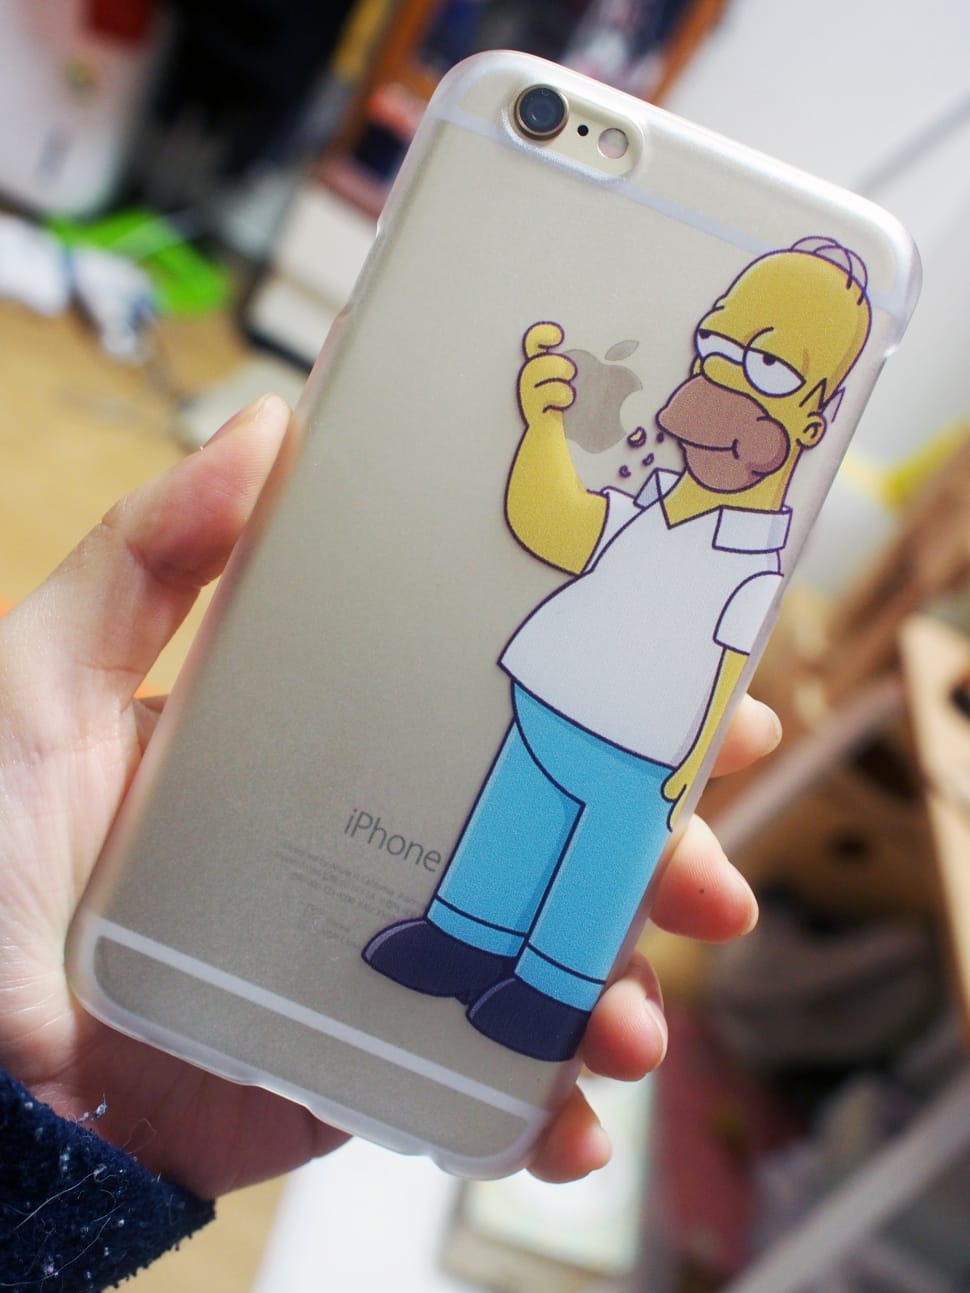 Gold Iphone 6 And Homer Simpson Iphone Case Preview - Simpsons Background In Iphone - HD Wallpaper 